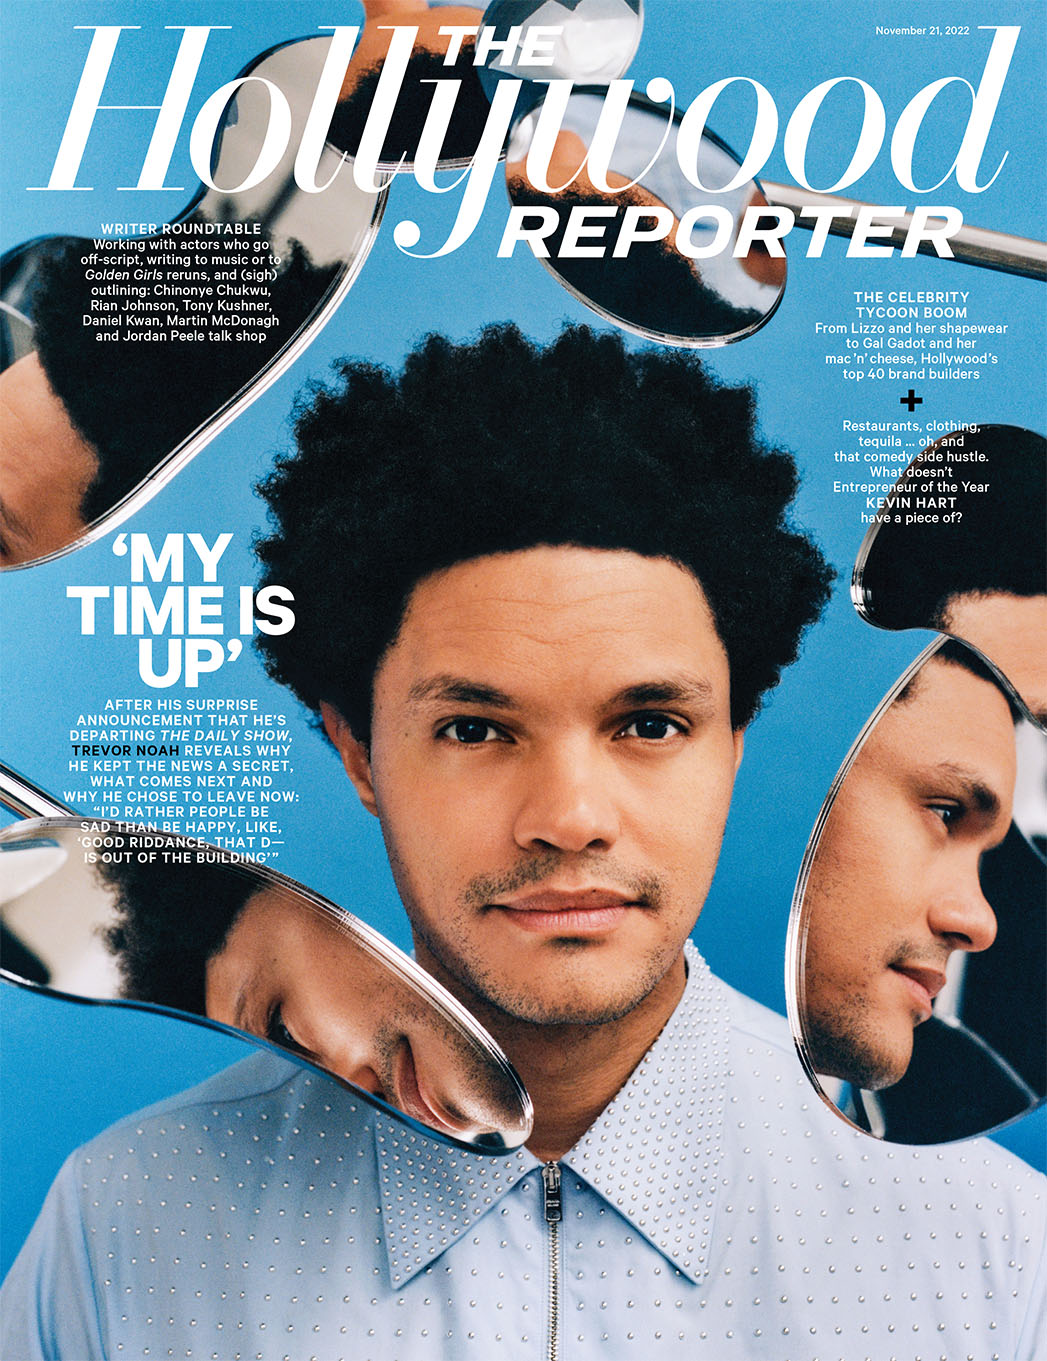 Trevor Noah was photographed Nov. 9 by Peter Ash Lee at Hudson Yards Loft in New York. PHOTOGRAPHED BY PETER ASH LEE